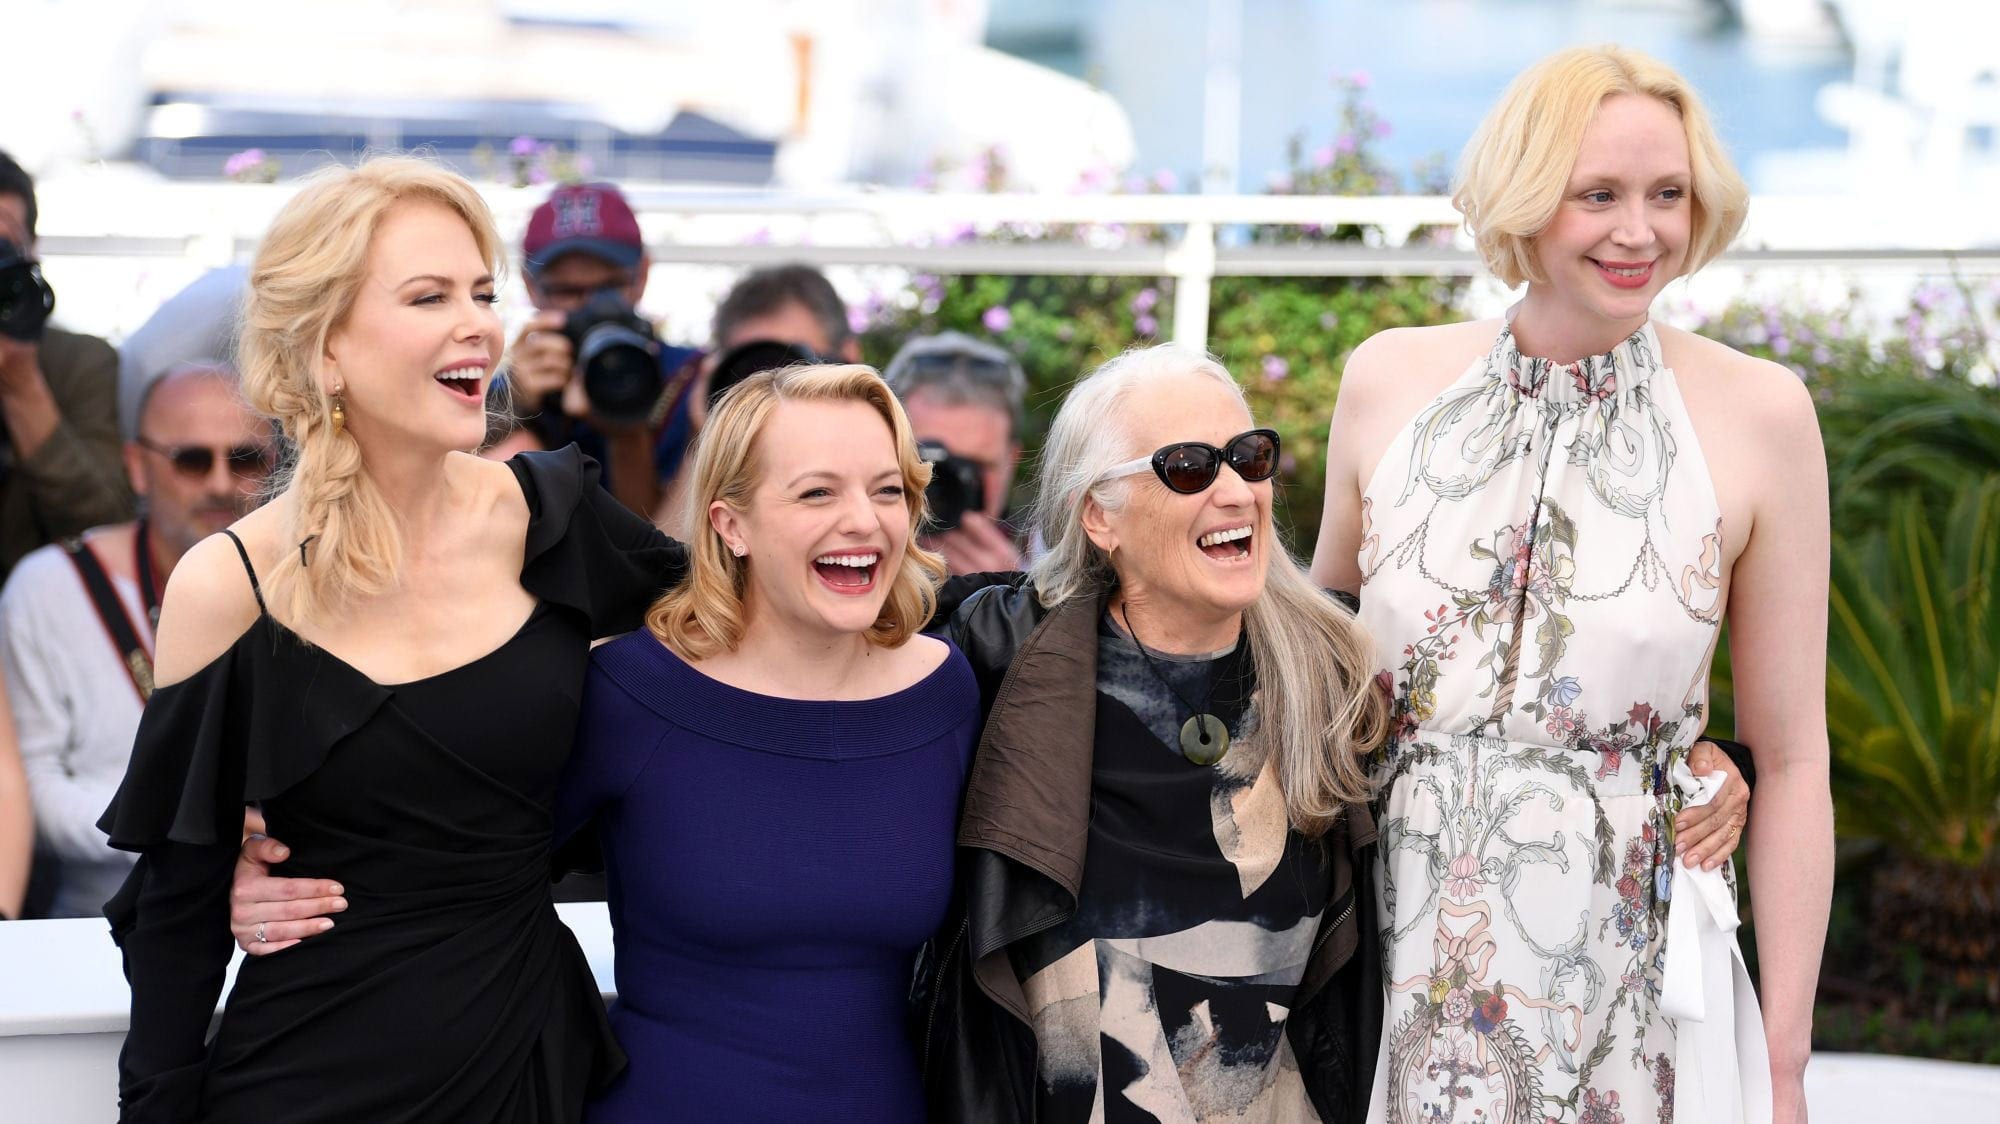 Just a few weeks ago, 82 women made history at the Cannes Film Festival by protesting gender inequality and the lack of female representation in the industry. Why 82? Because in 71 years, out of 82 women and over more than one thousand men who’ve had their feature films competing for a Palme d’Or at the festival.